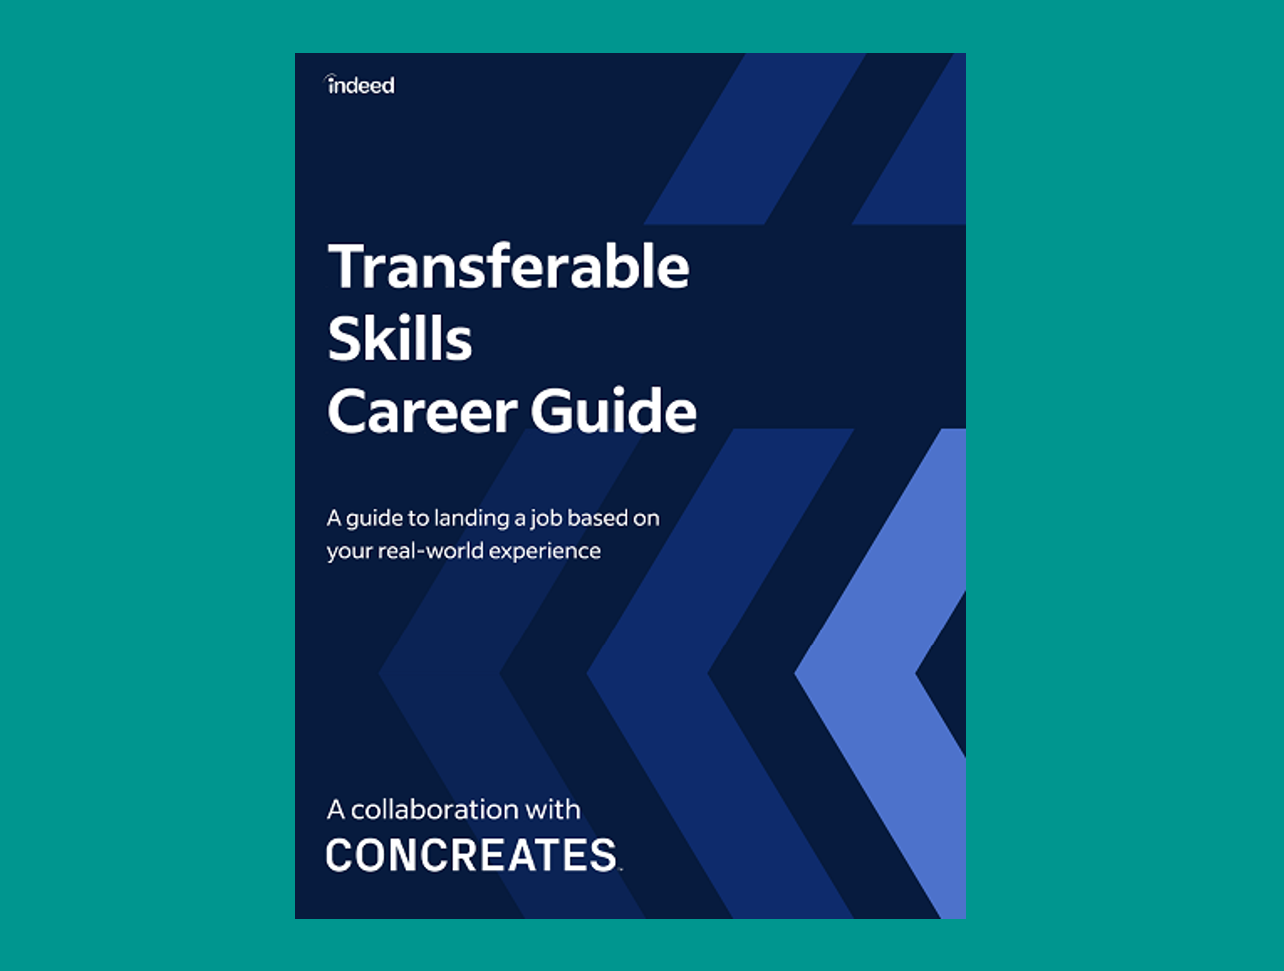 Indeed Transferable Skills Career Guide